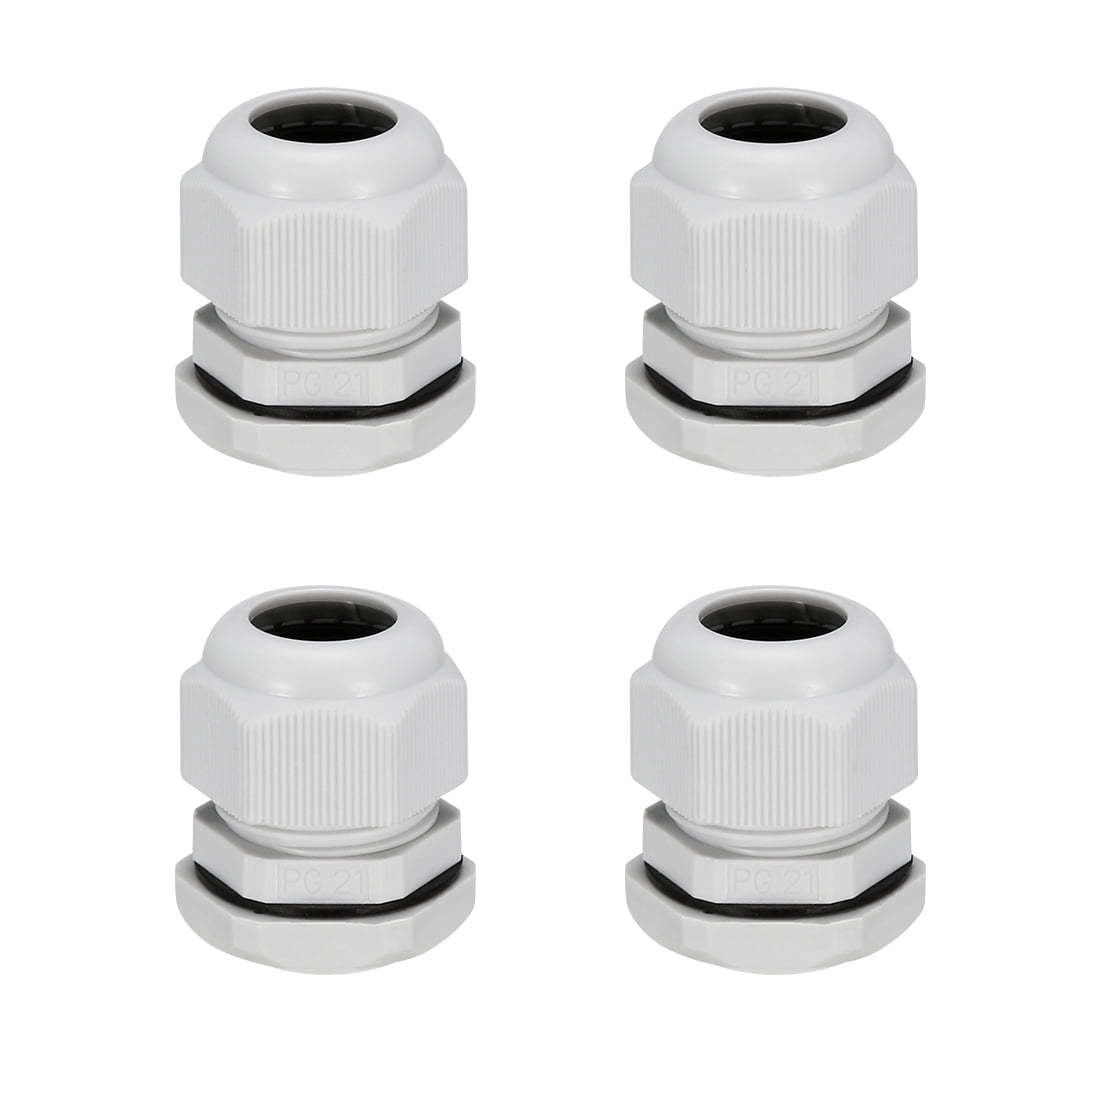 uxcell 8Pcs PG29 Cable Gland Waterproof Plastic Joint Adjustable Locknut Black for 18mm-25mm Dia Cable Wire